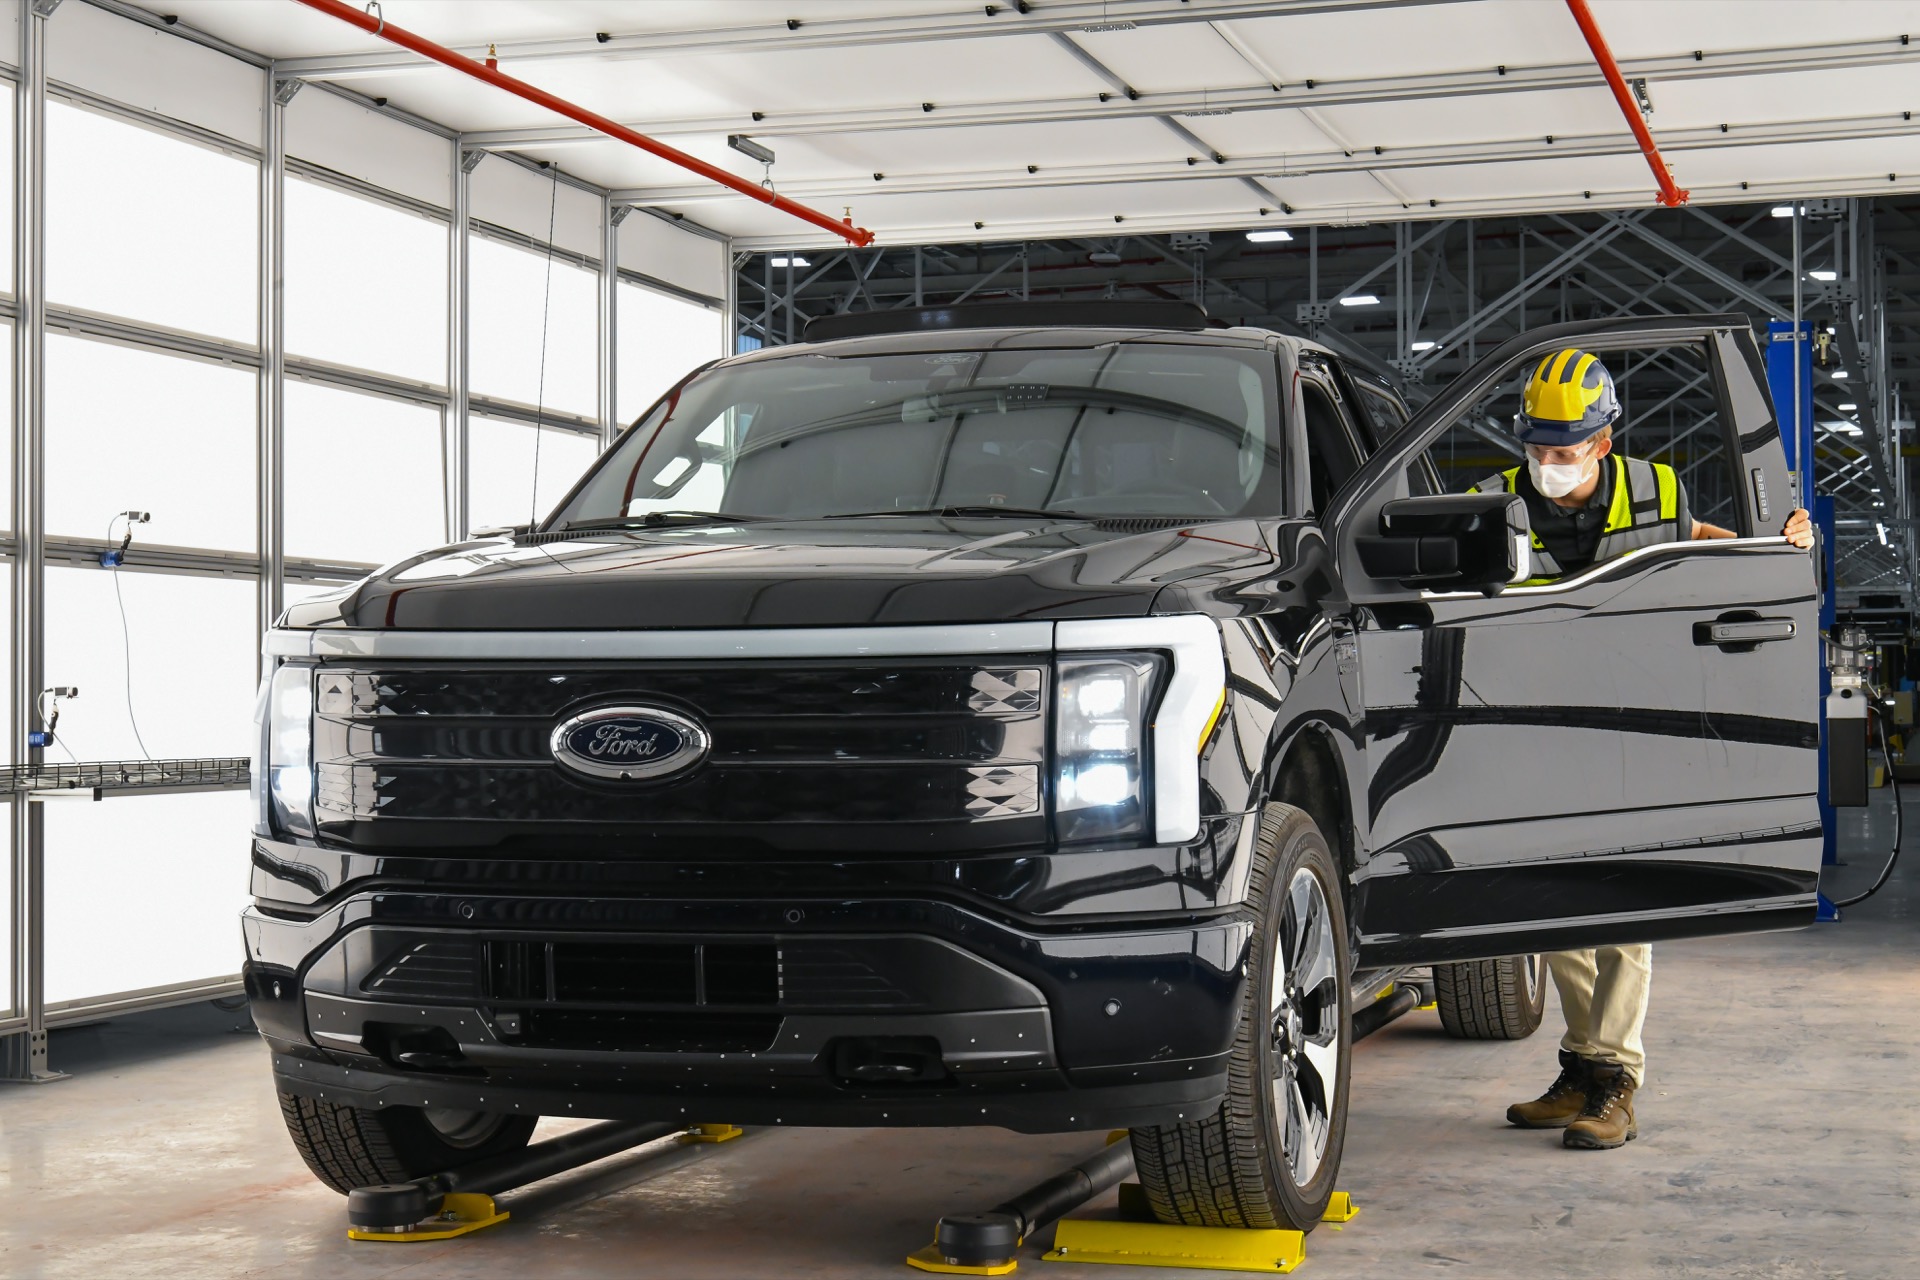 pre-production-ford-f-150-lightning--rouge-electric-vehicle-center_100807041_h.jpg